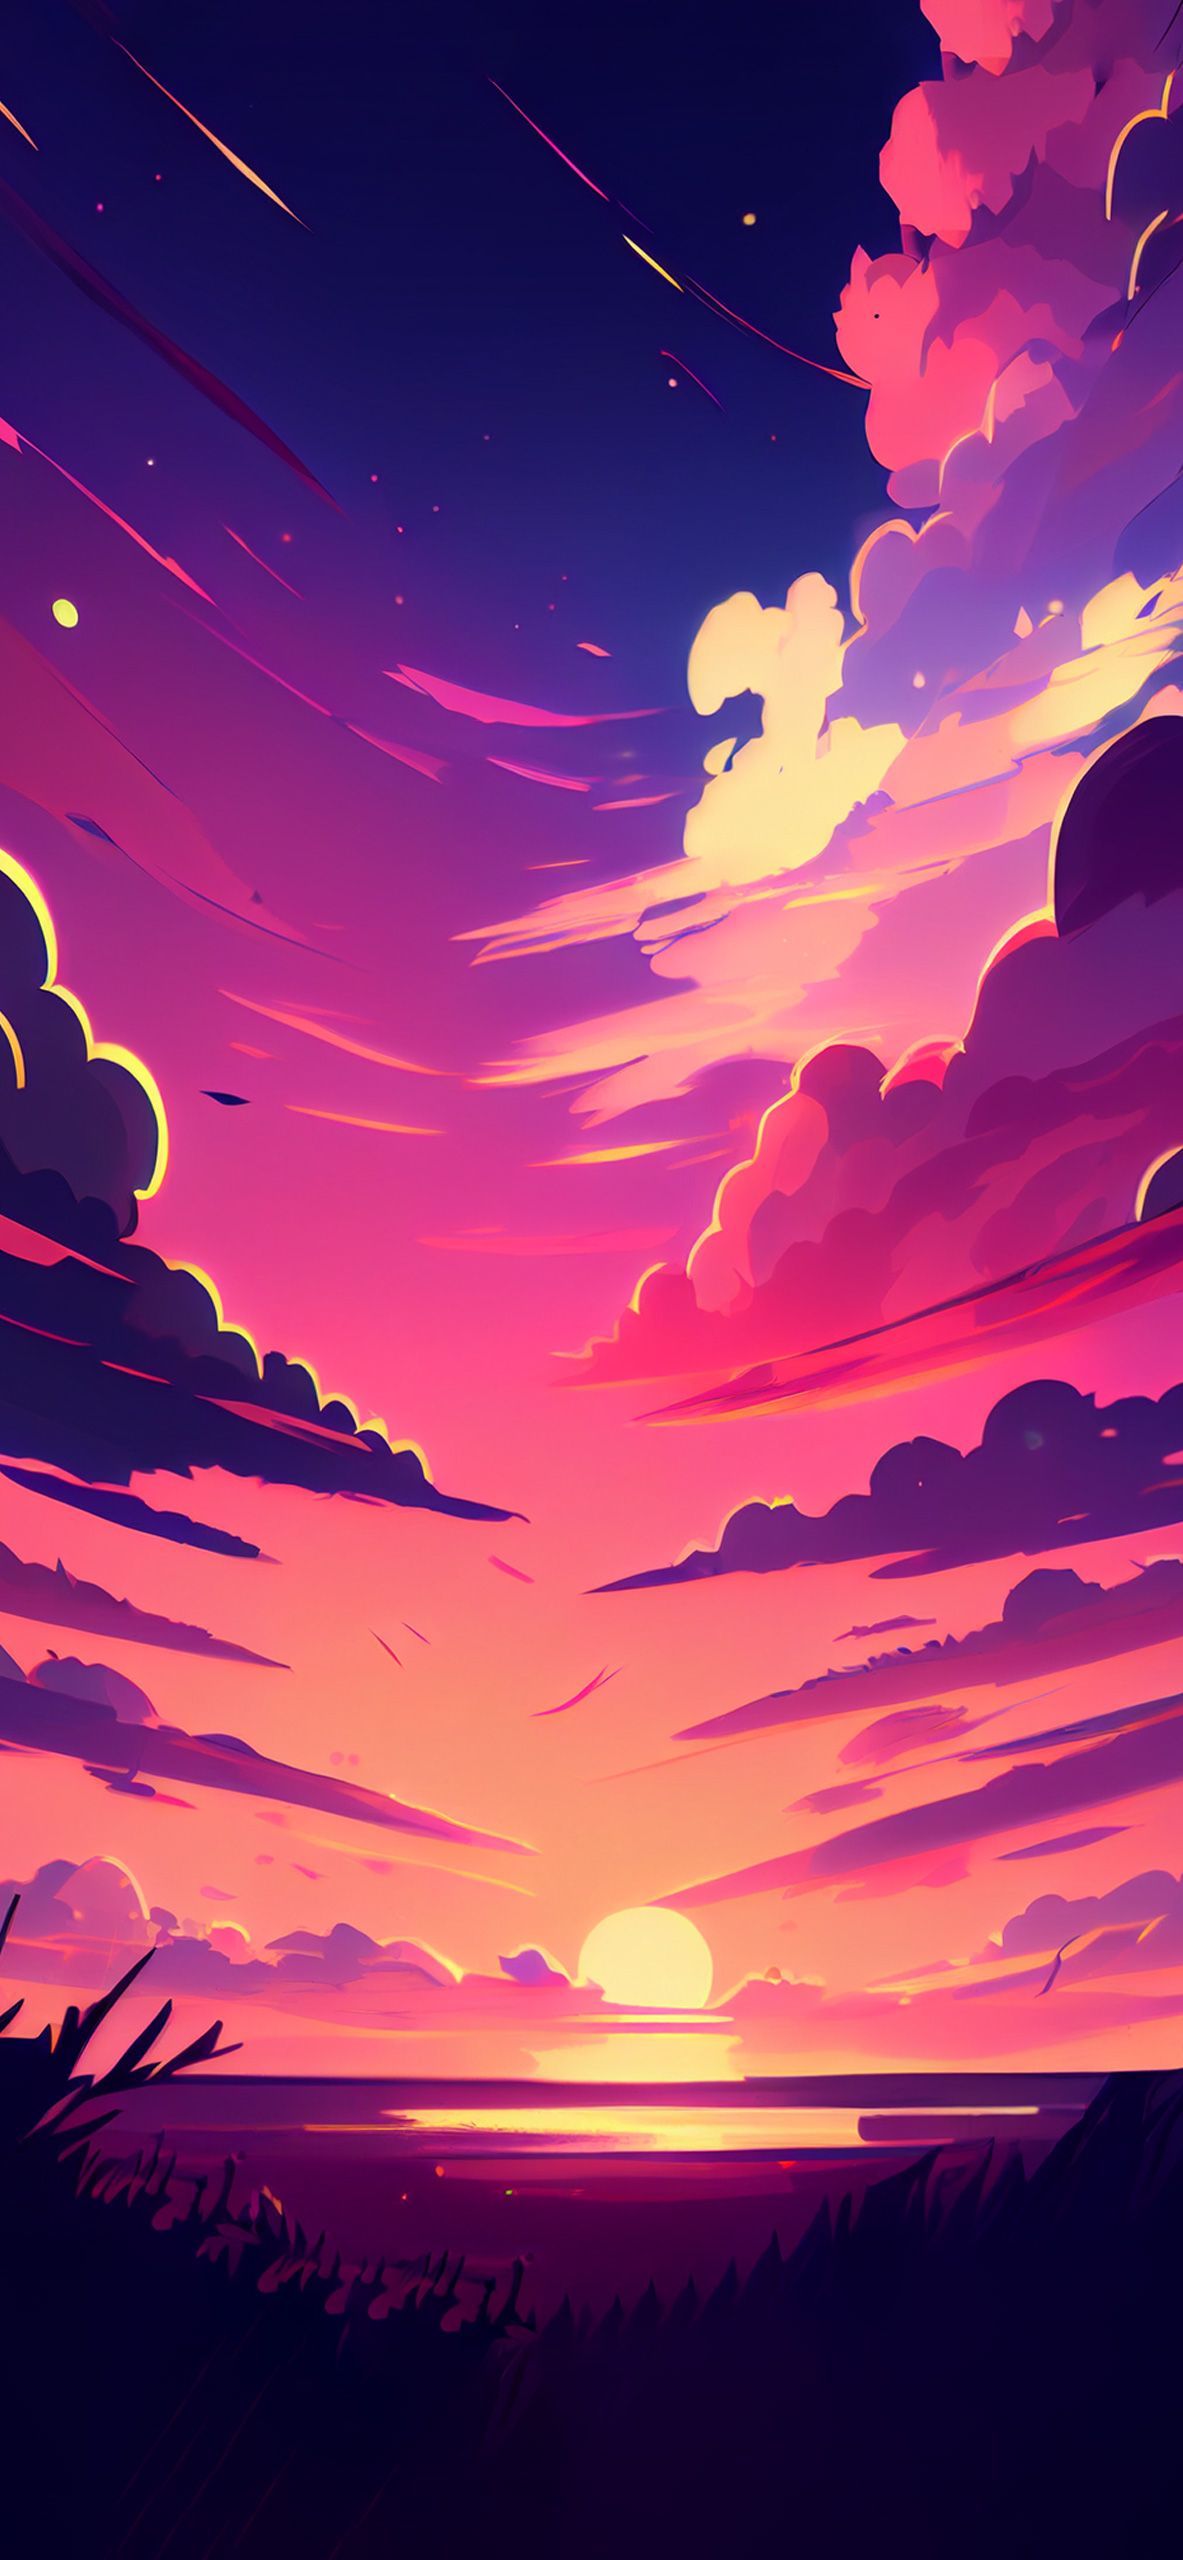 Aesthetic sunset wallpaper for phone with a pink and purple sky - Warm, vector